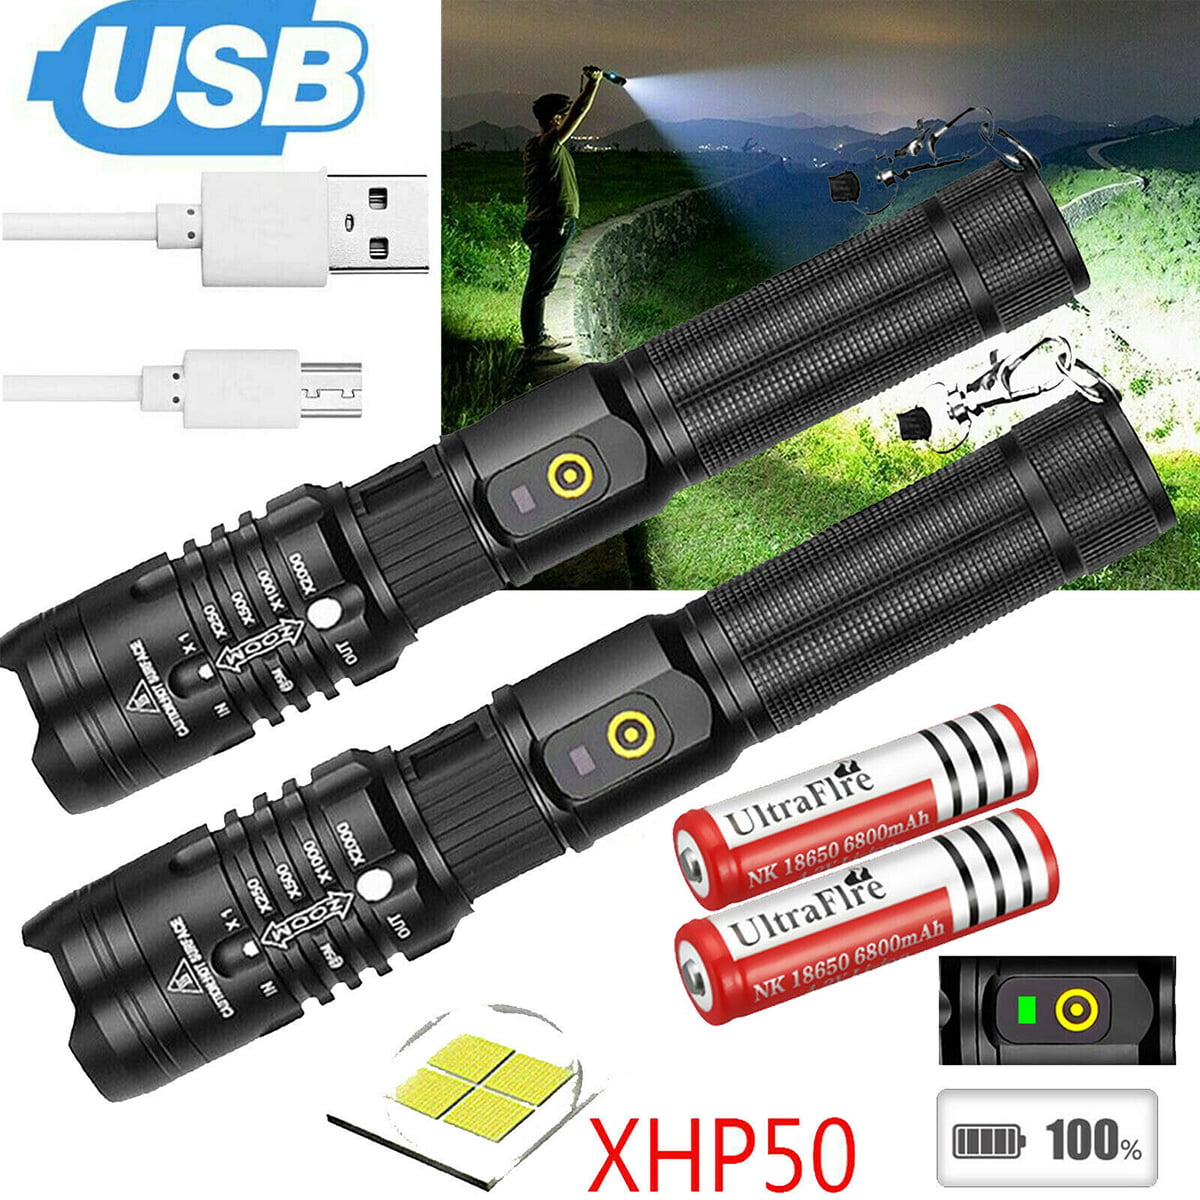 990000Lumen LED Headlamp Headlight Fast Rechargeable Flashlight For Camping 